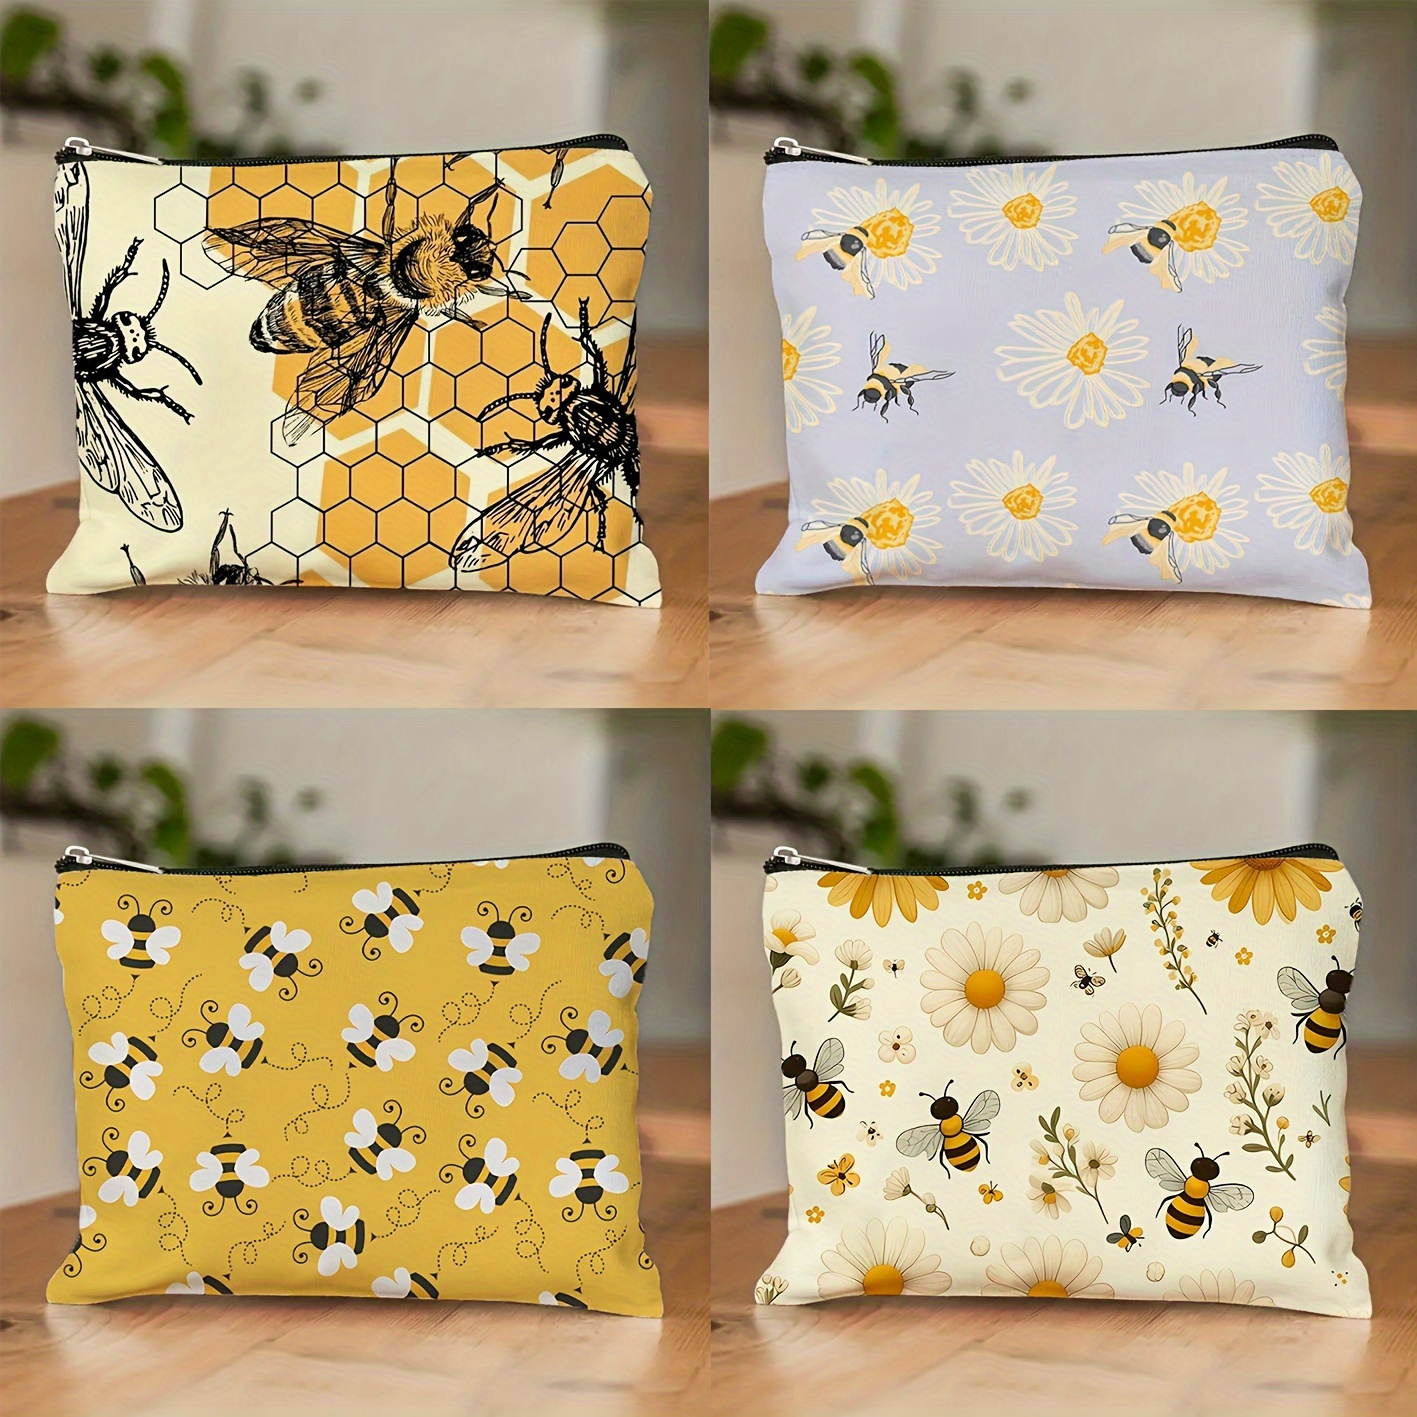 

1pc Bee Themed Polyester Cosmetic Bag - Unscented, Waterproof Travel Makeup Pouch With Zipper For Women And Girls - Durable Honeybee Print Organizer Toiletry Bag Perfect For Gifts